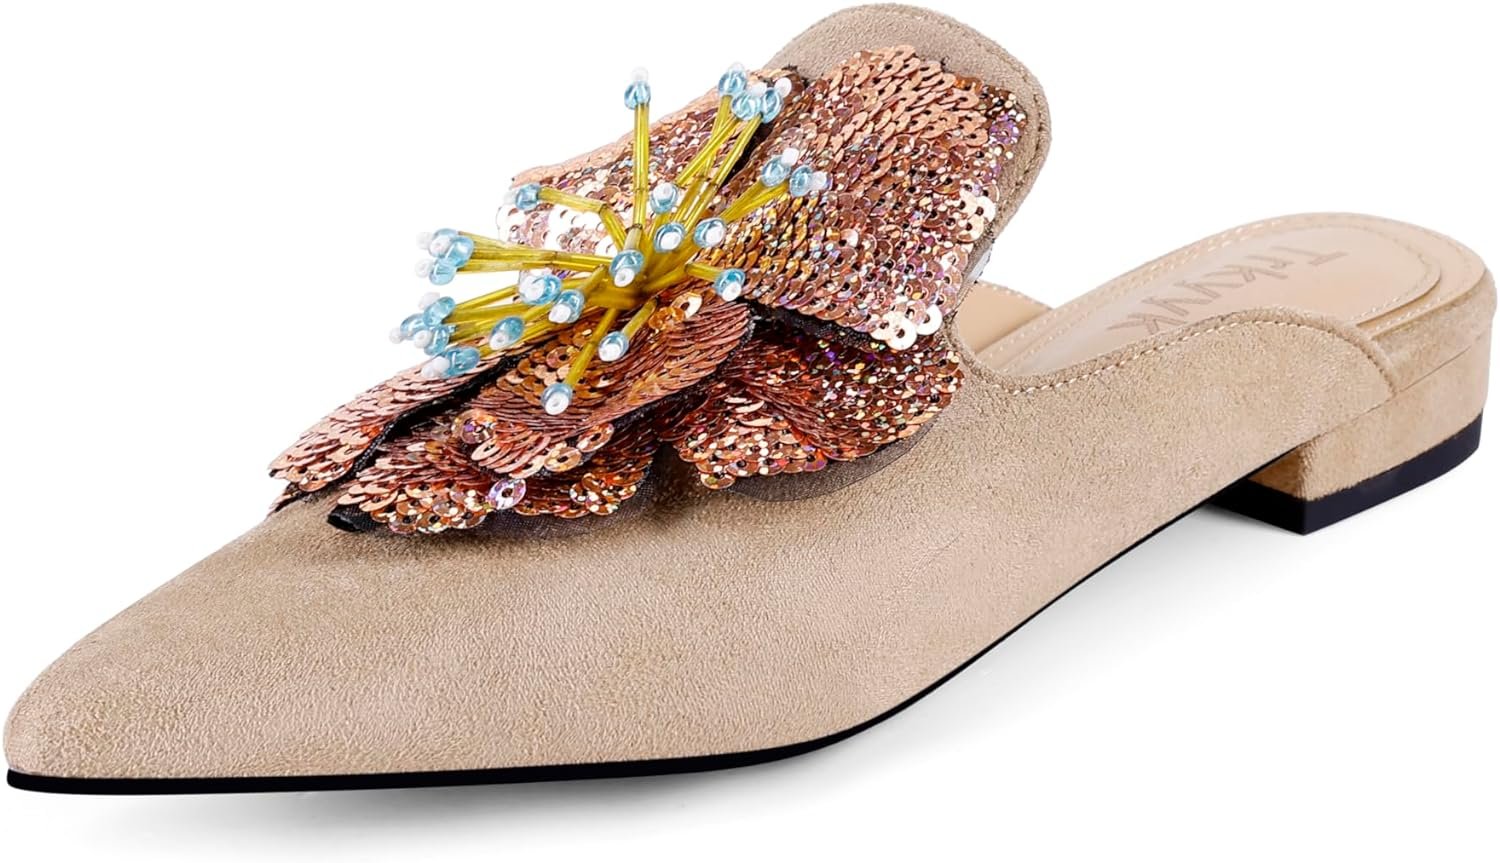 Mules for Women Pointed Toe Comfortable Flats Backless Loafers with Sequin Flower